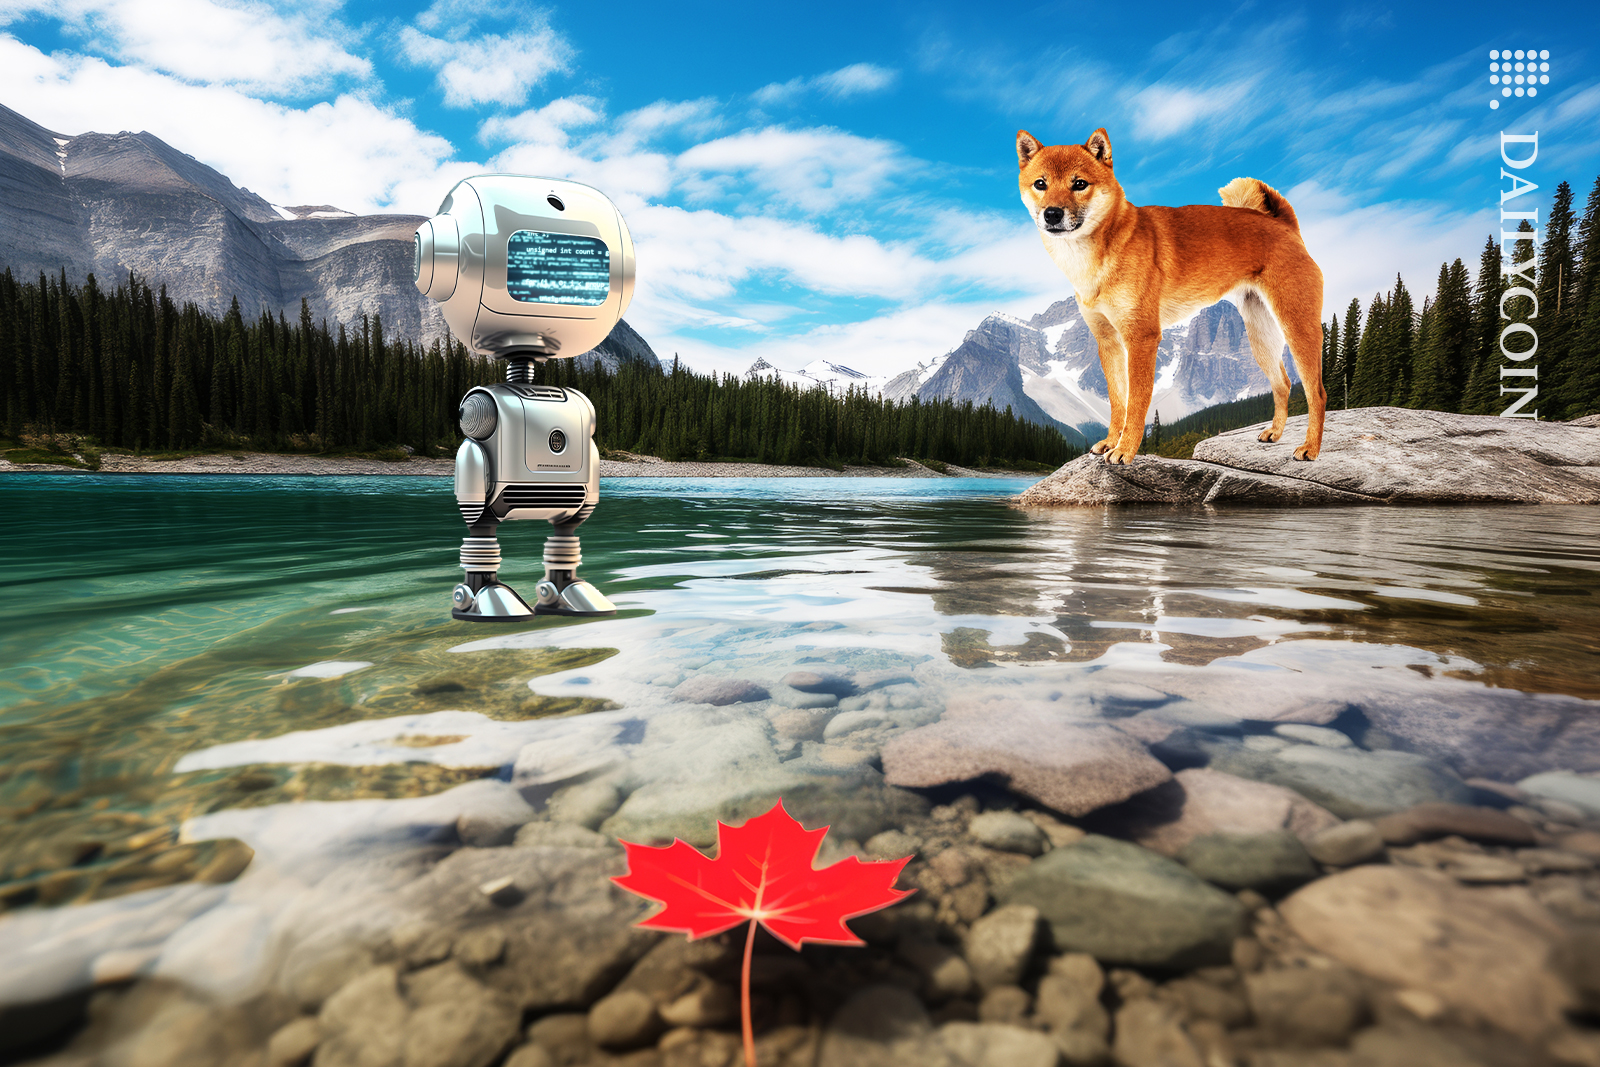 Shiba in Canada looking at the mainnet robot machine.